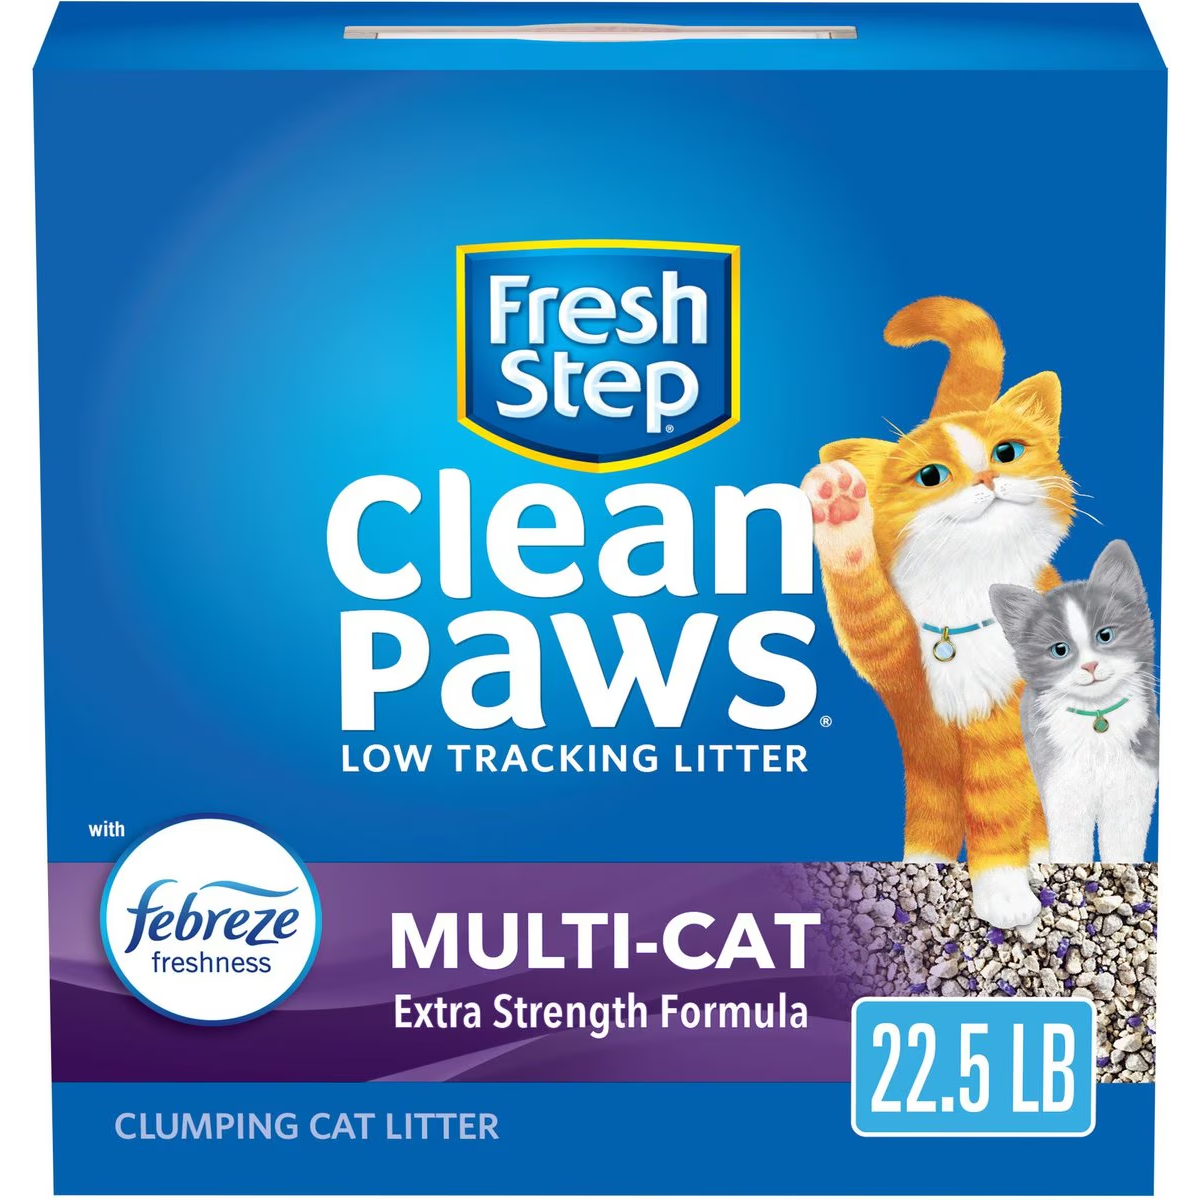 Fresh Step Clean Paws Multi-Cat Scented Clumping Cat Litter New